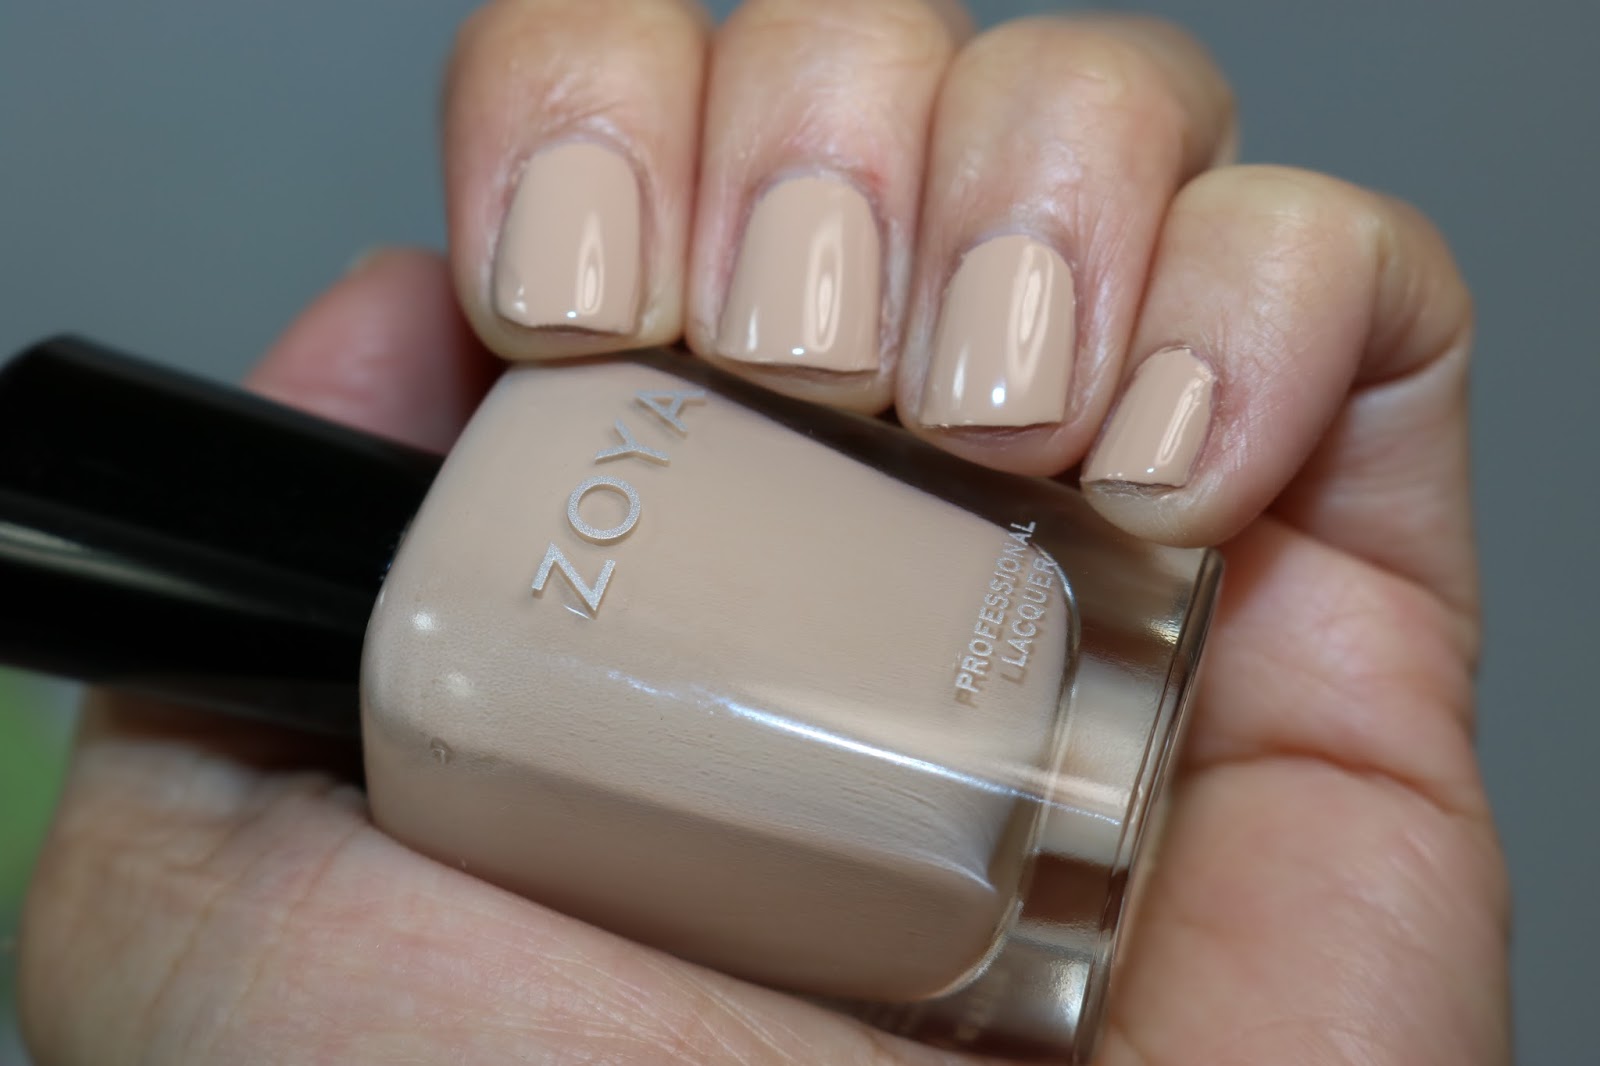 Zoya Nail Polish in "Palm Springs Collection" - wide 7